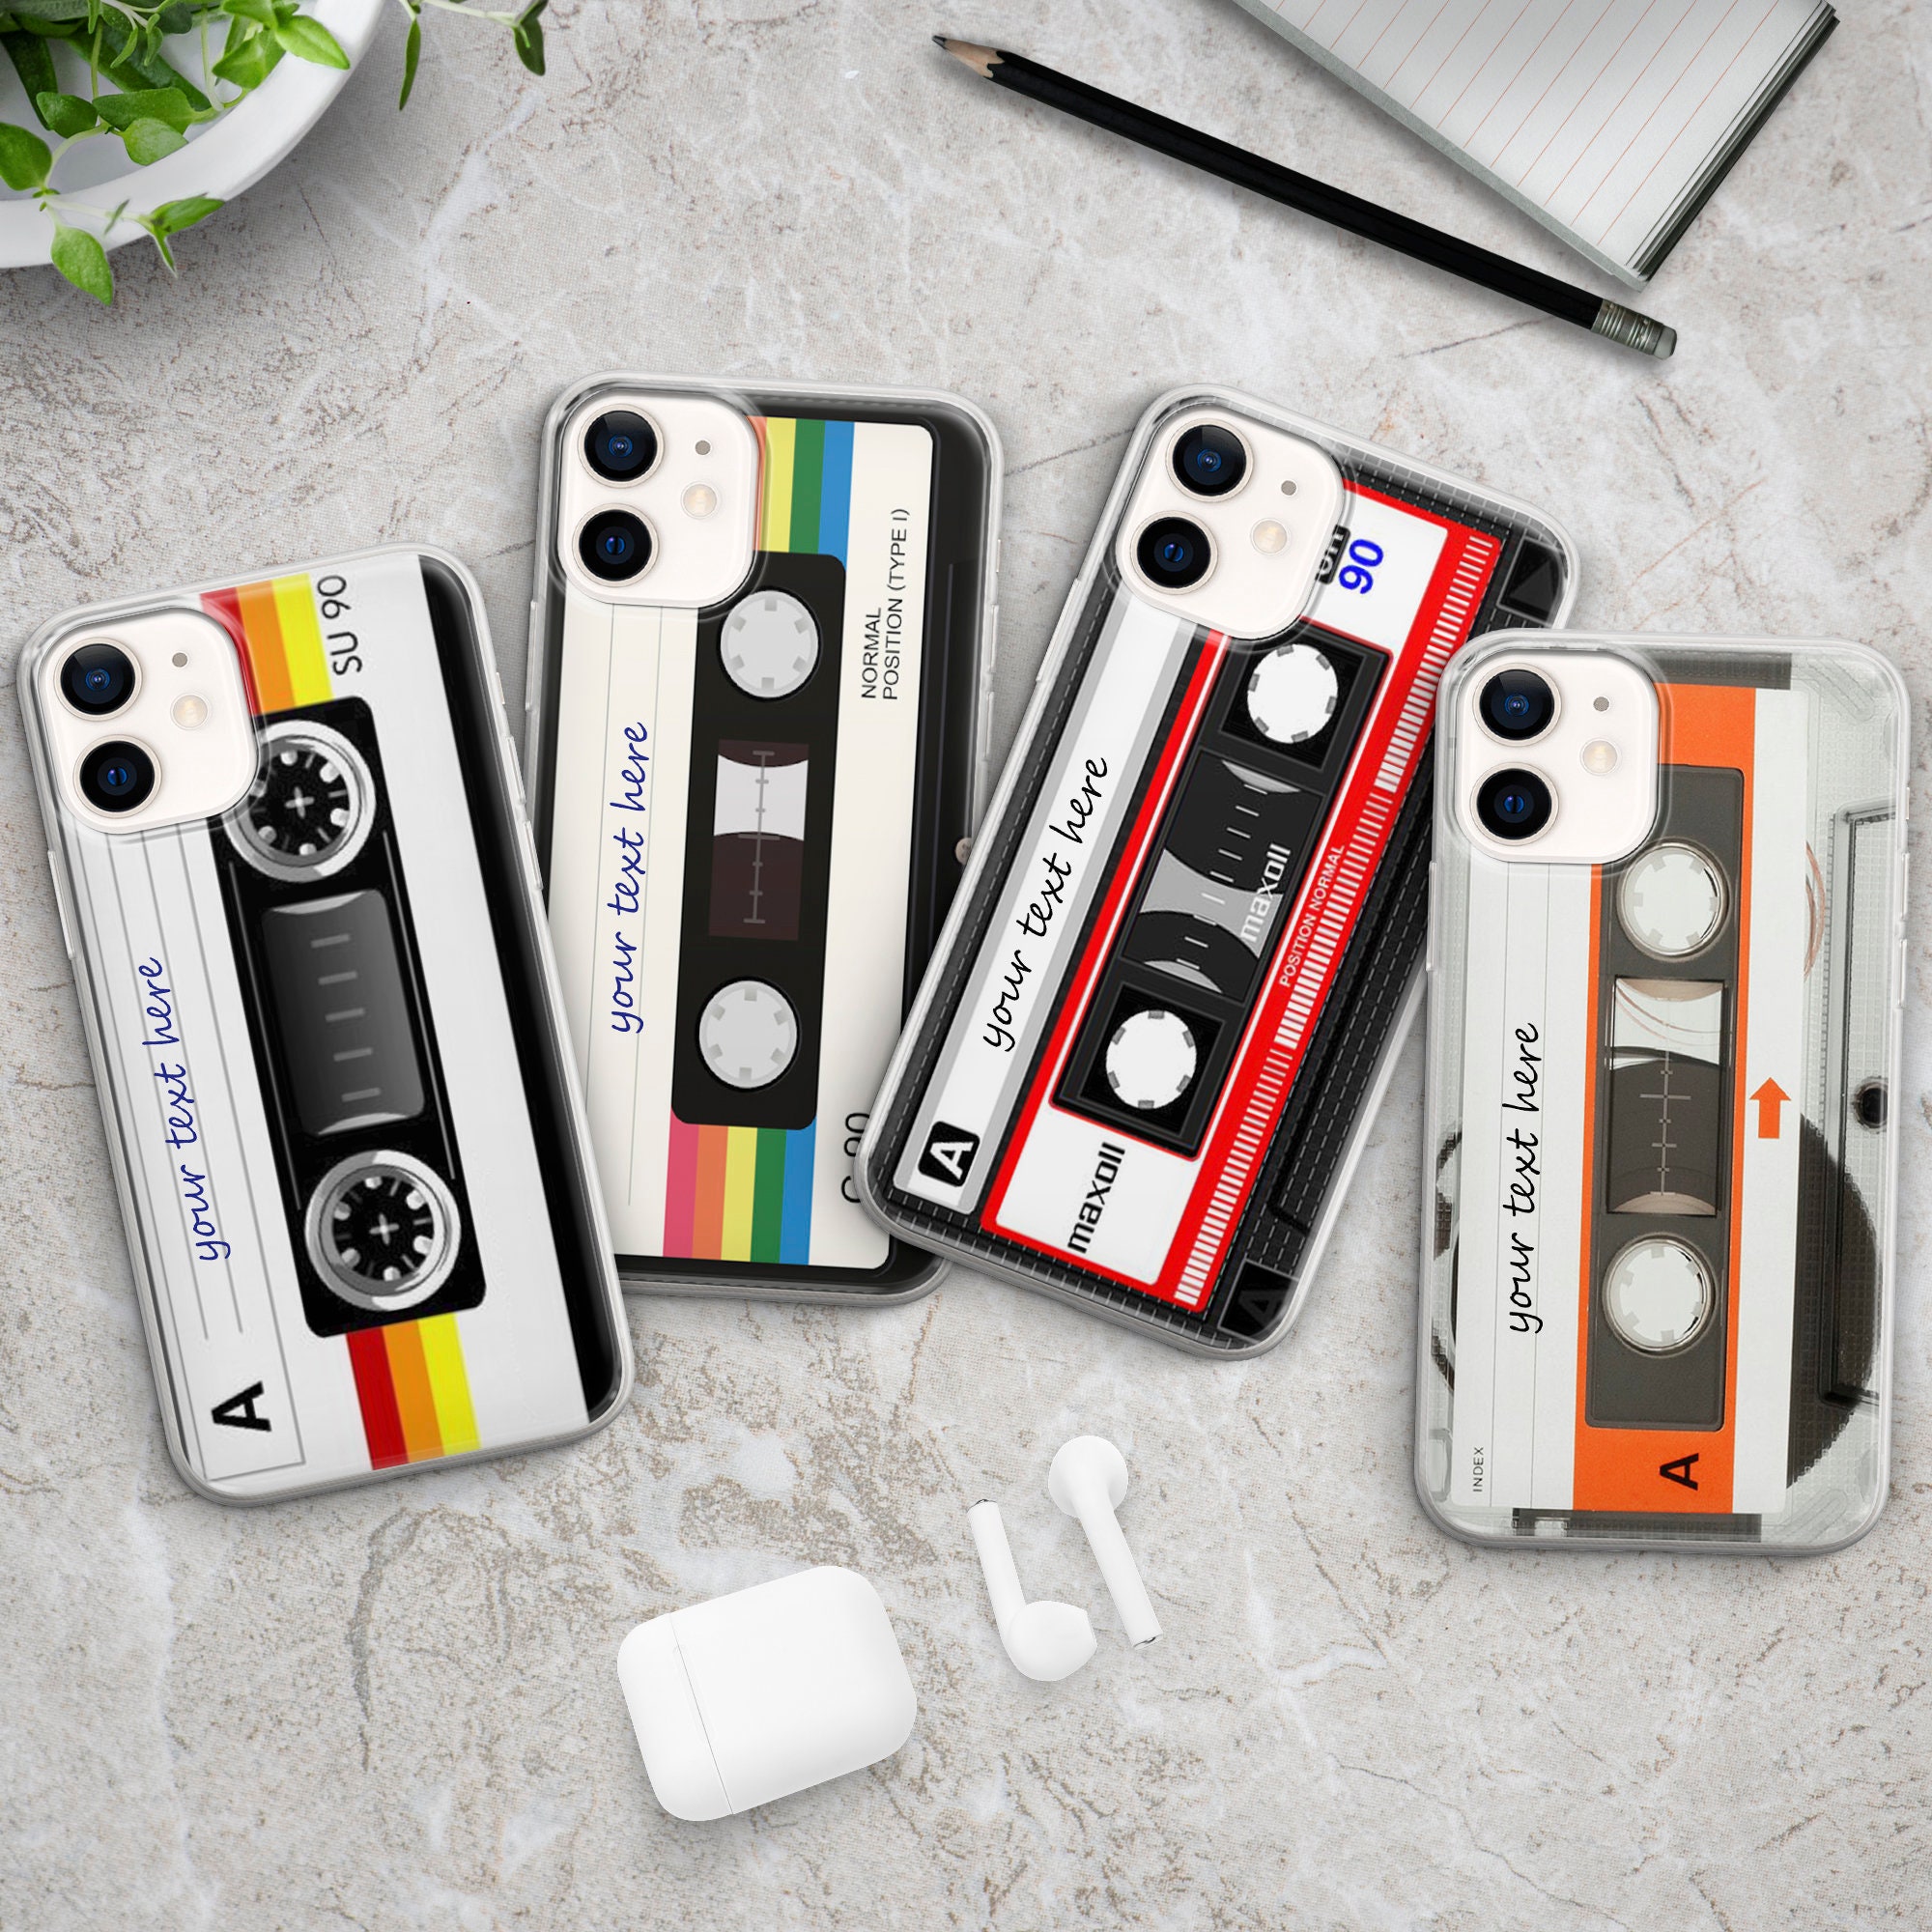 Cassette Tape Phone Case, Retro Vintage Video Tape Cover for iPhone 7, 8,  11, 12, Galaxy S10, S20, A40, A50, A51, P20, P30 